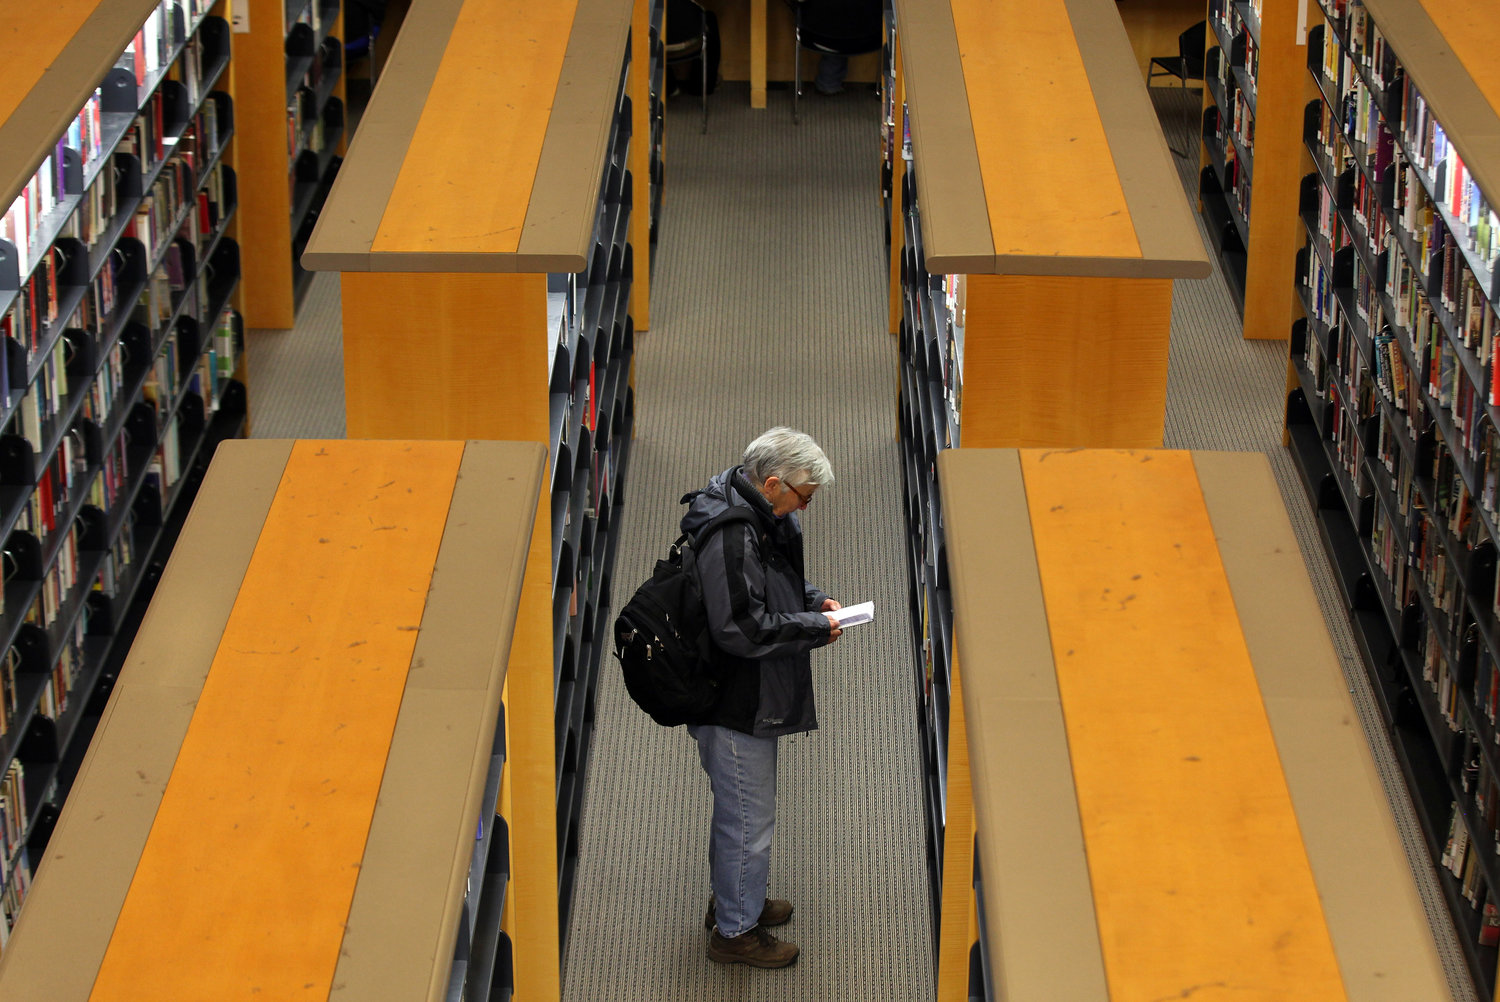 A library patron looks at a book at the main branch of the San Francisco Public Library on Jan. 11, 2011, in San Francisco. Librarians and their legislative allies in several states are pushing publishers of electronic books to lower their prices and ease licensing terms. (Justin Sullivan/Getty Images/TNS)